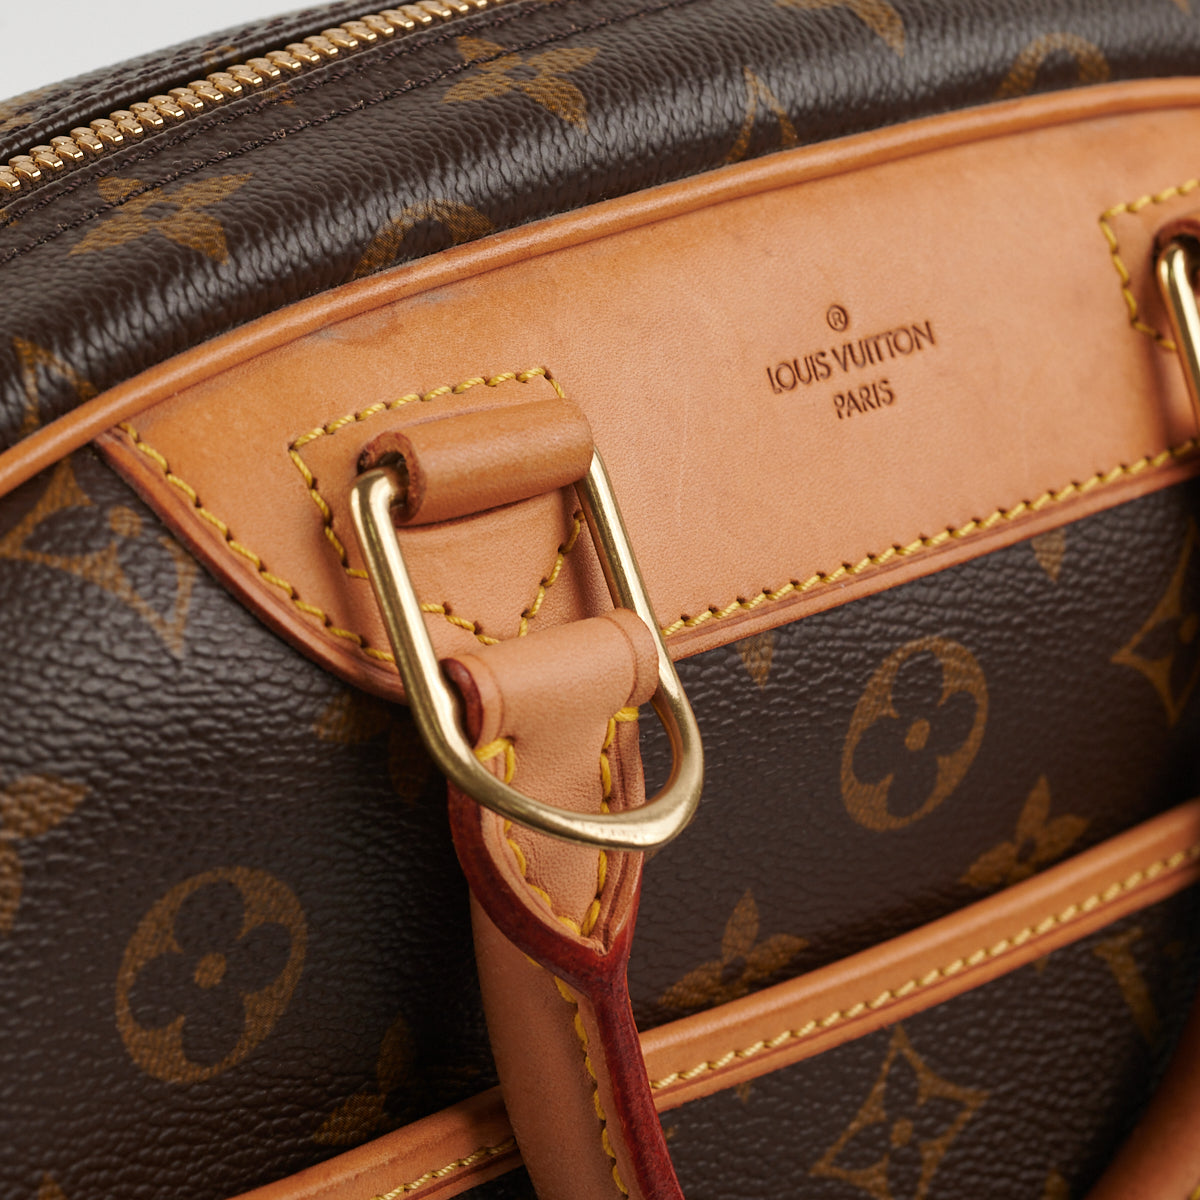  A Guide to Authenticating the Louis Vuitton Deauville